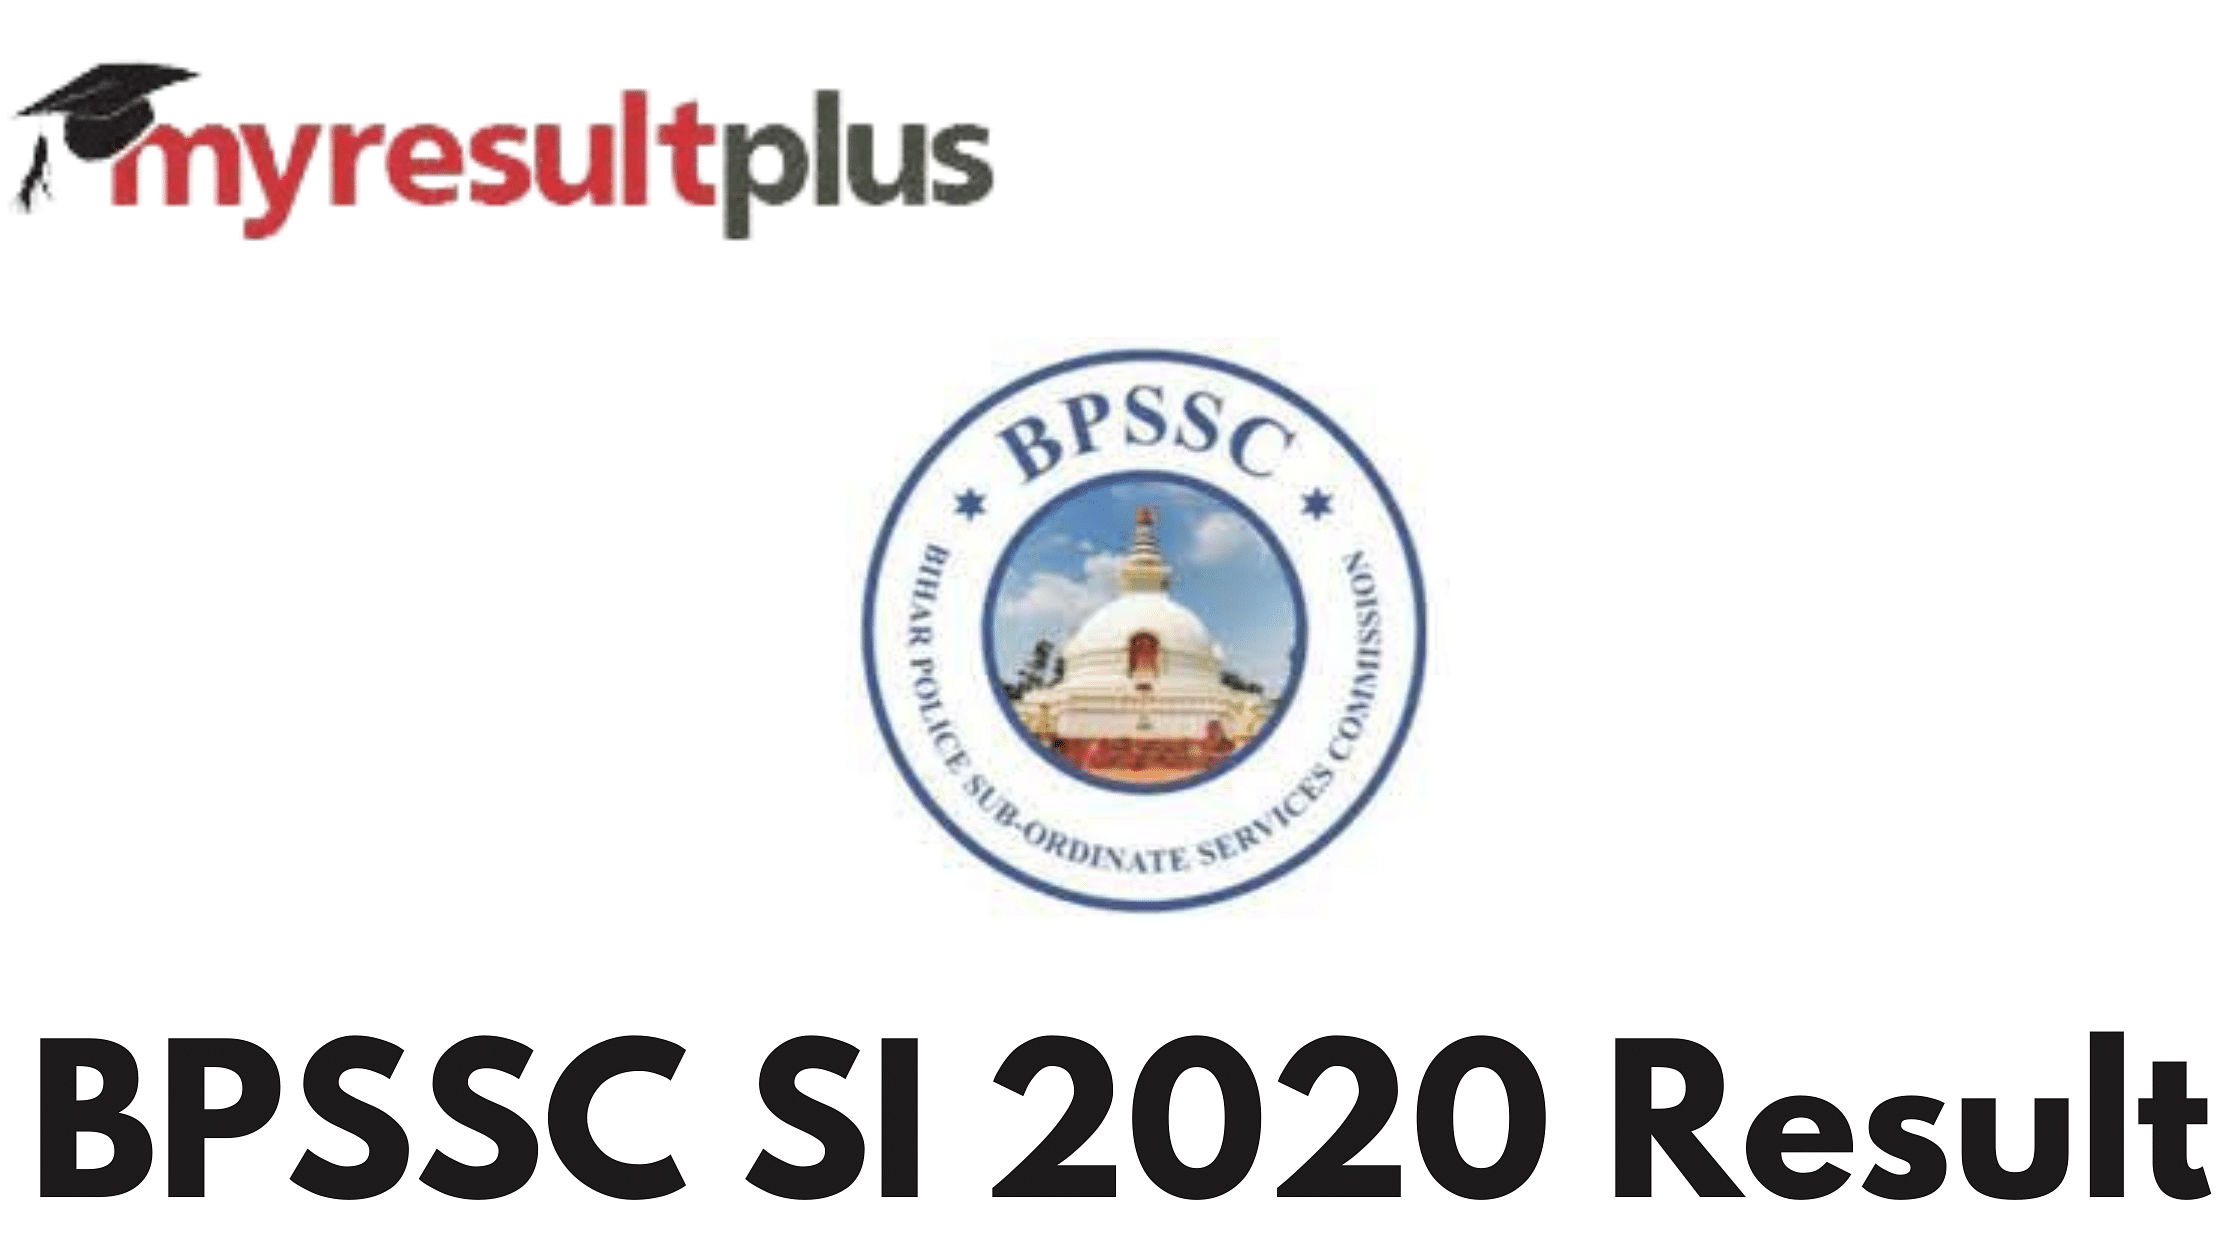 BPSSC SI 2020 Final Result Announced, Direct Link to Check Here